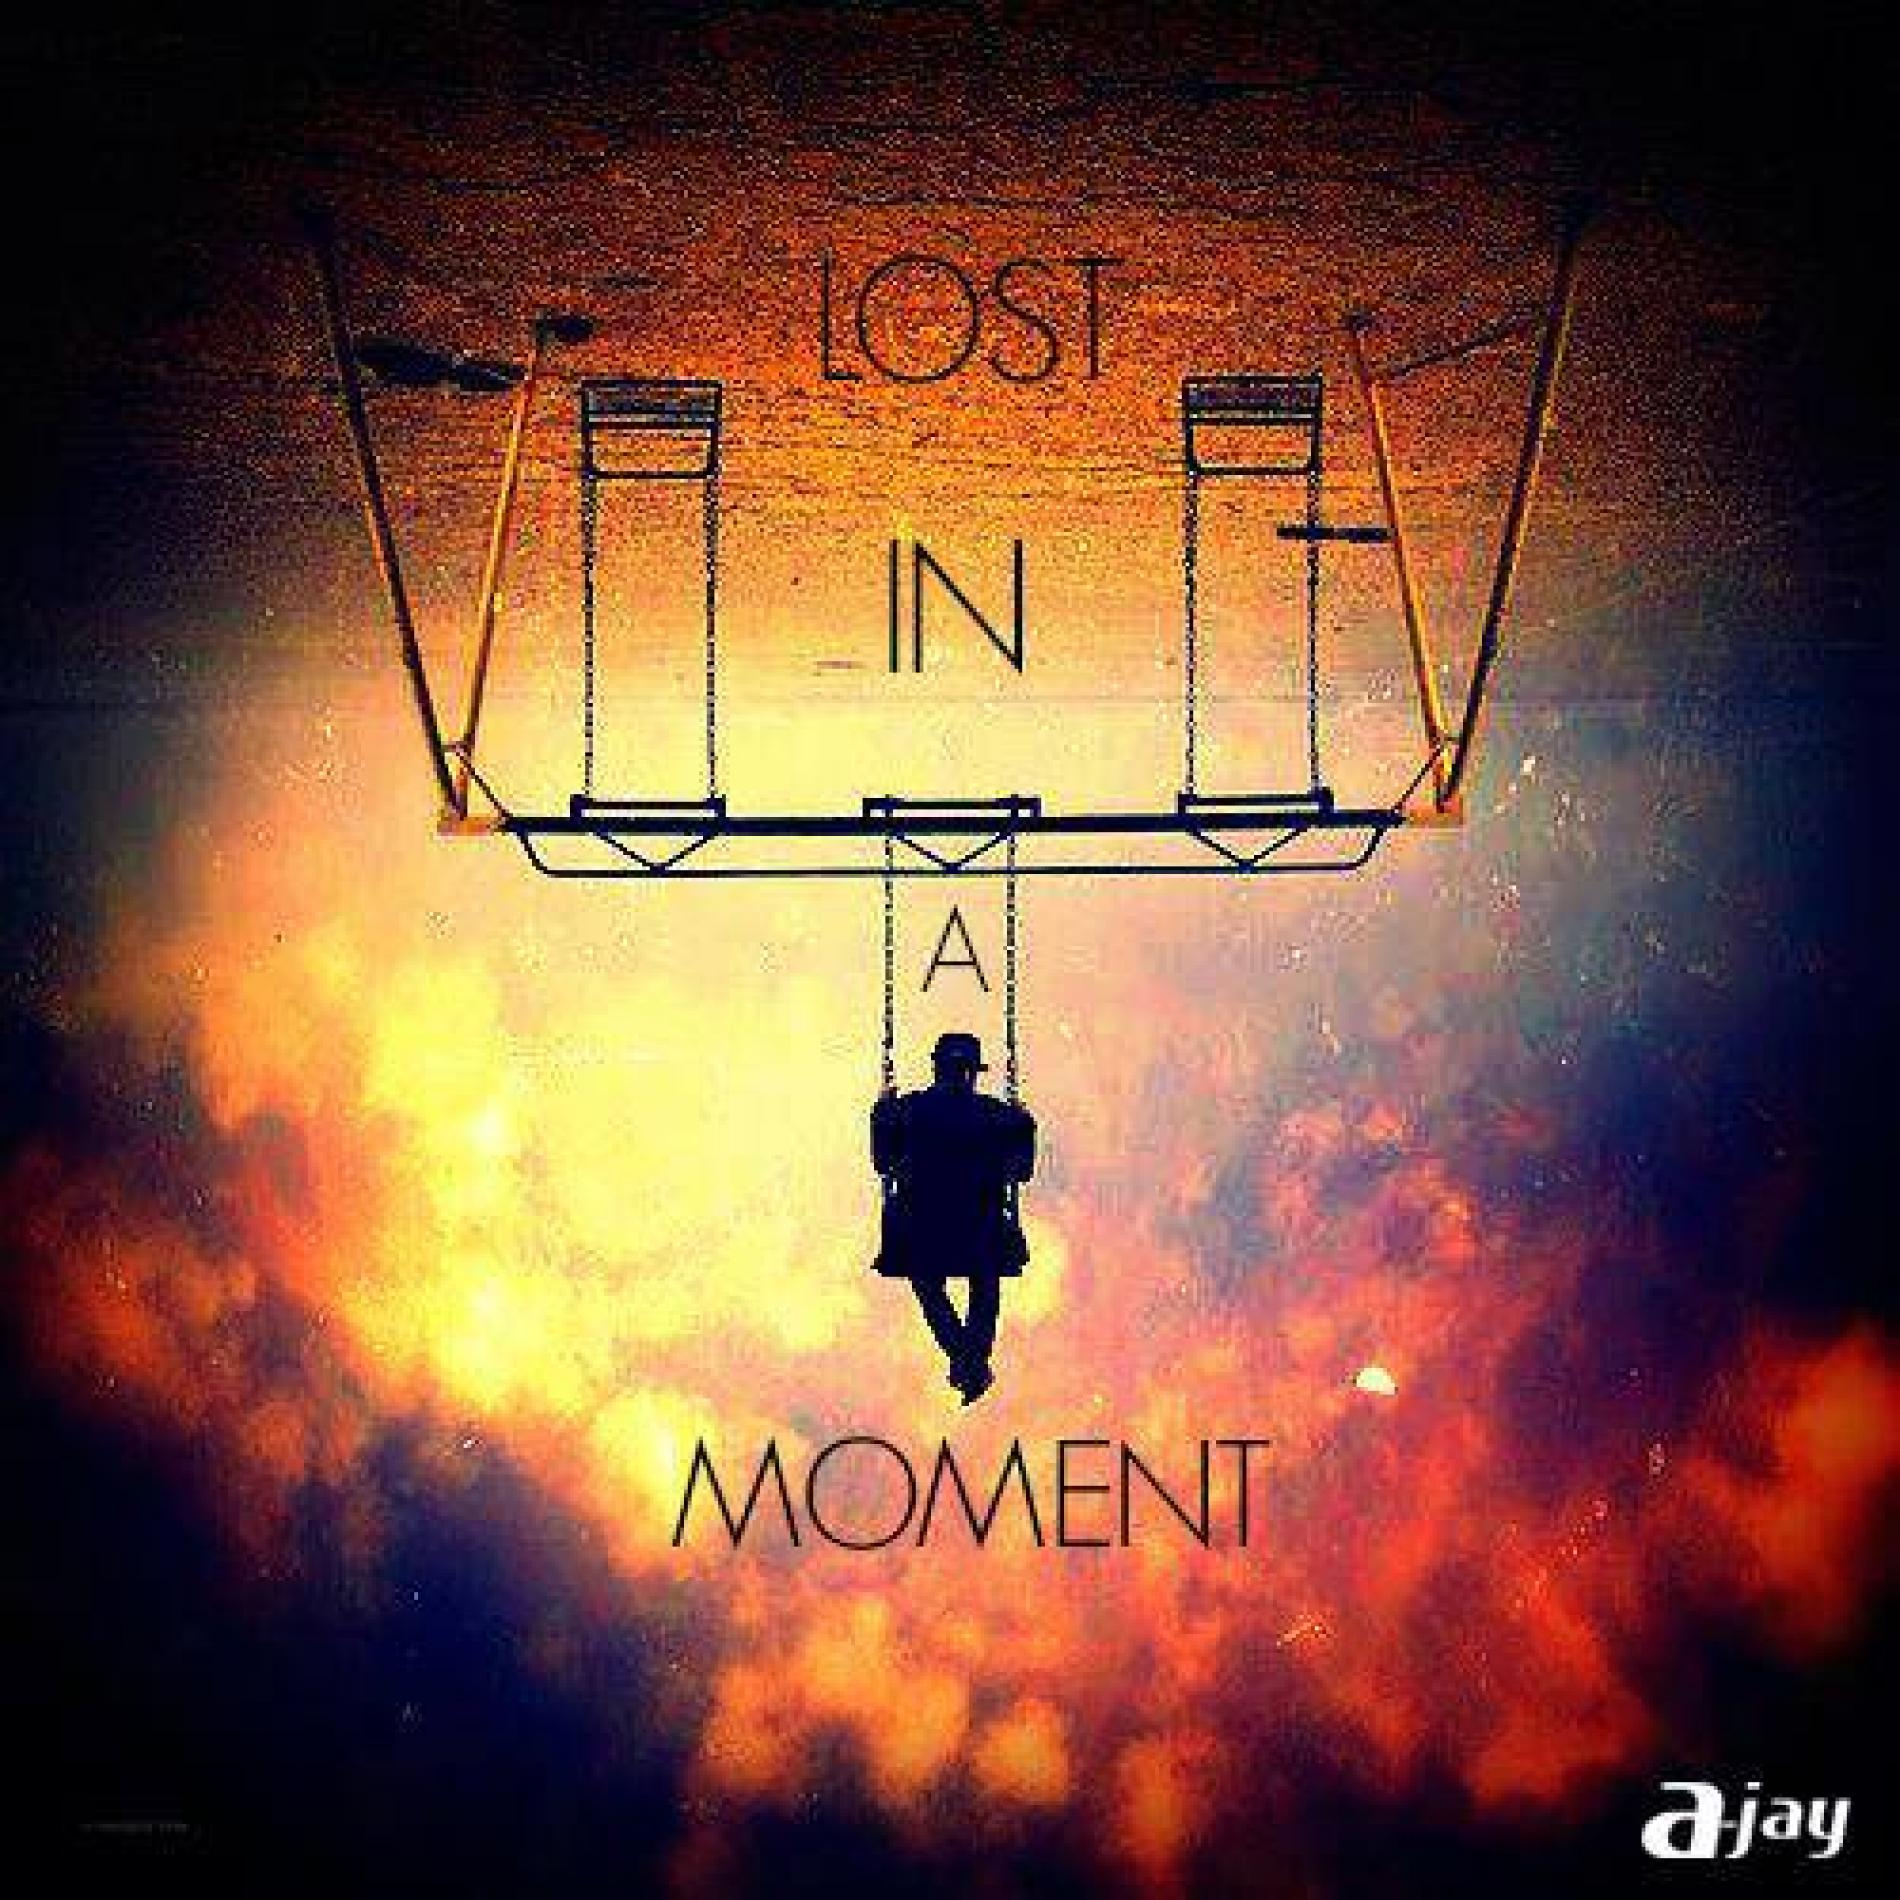 A-Jay: Lost In A Moment